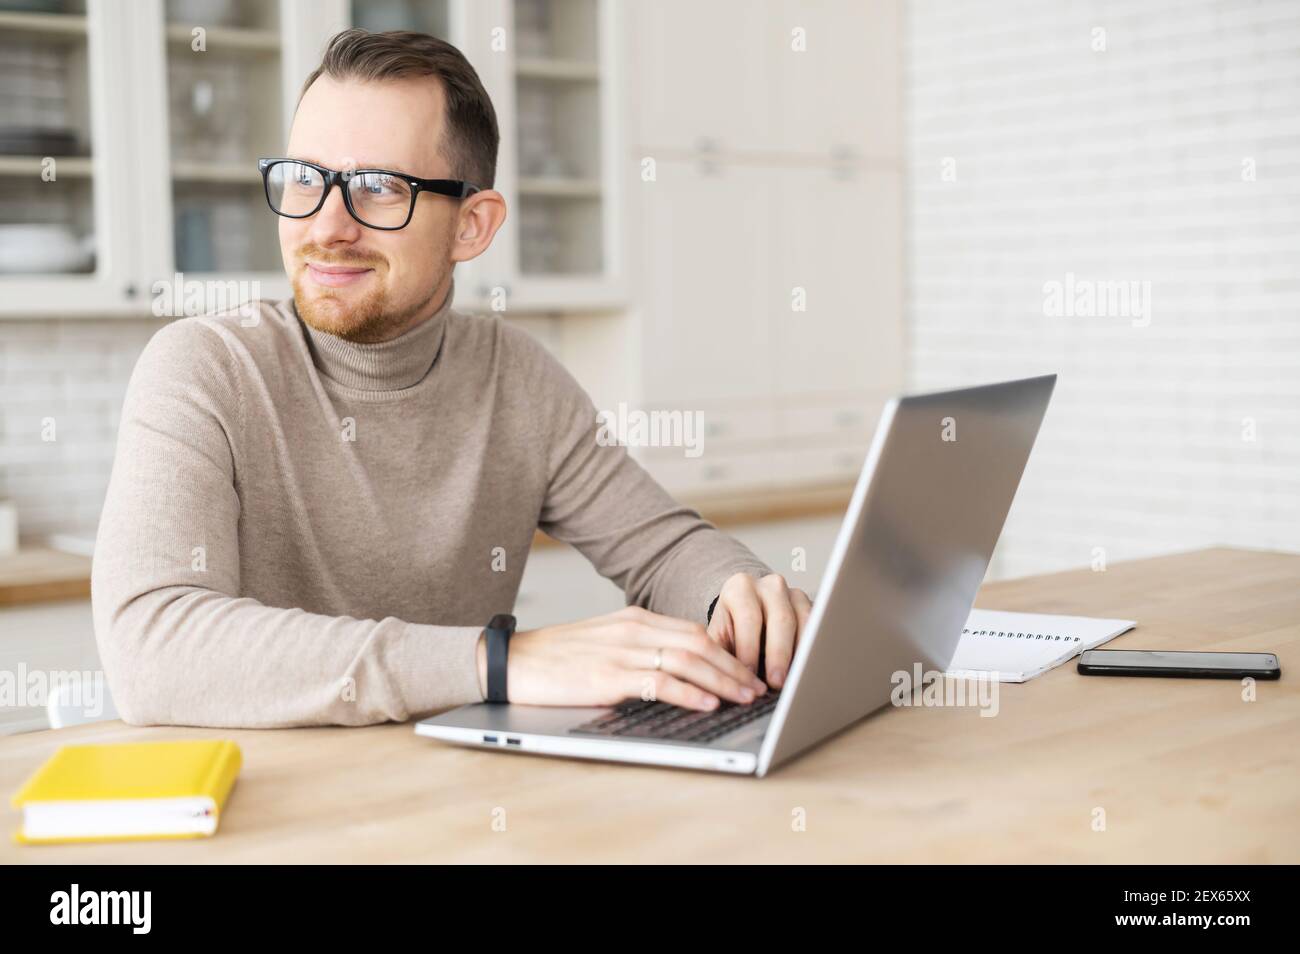 Handsome young hipster freelancer man with beard in glasses sitting at the table and looking away, taking a break from working on laptop, dreaming about vacation or salary, enjoying working from home Stock Photo